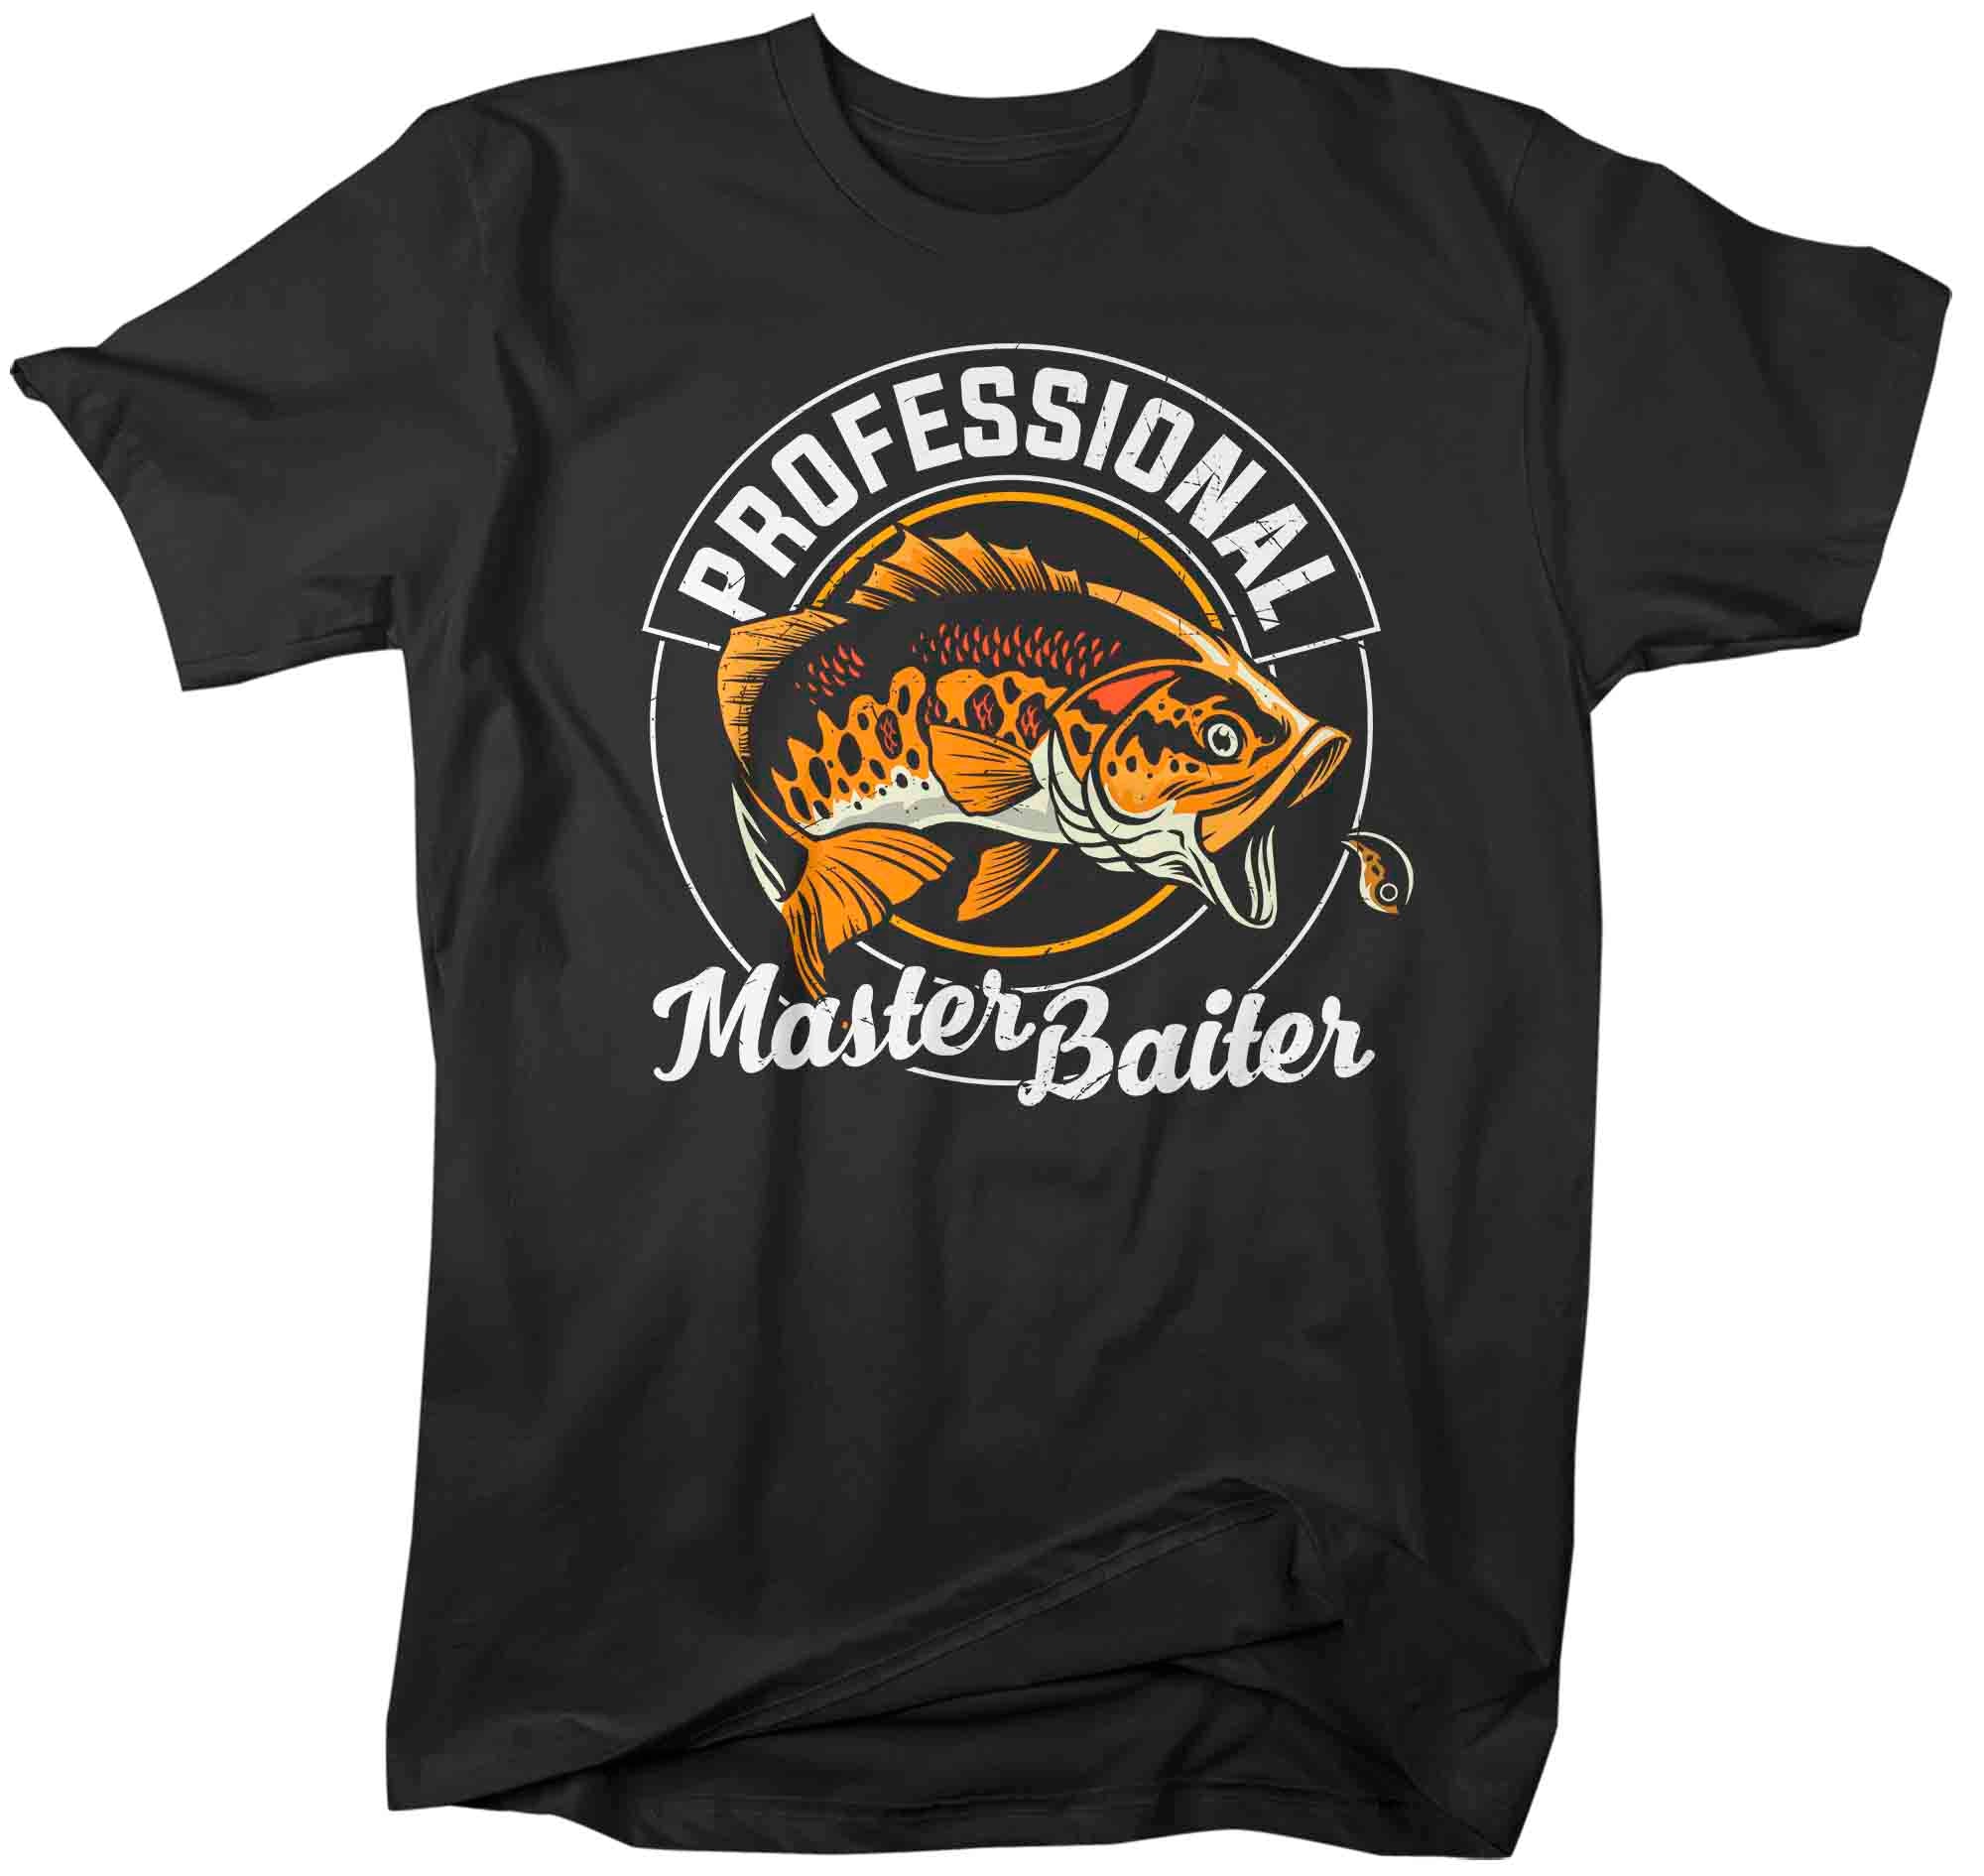 men's fishing graphic tees for Sale,Up To OFF 60%